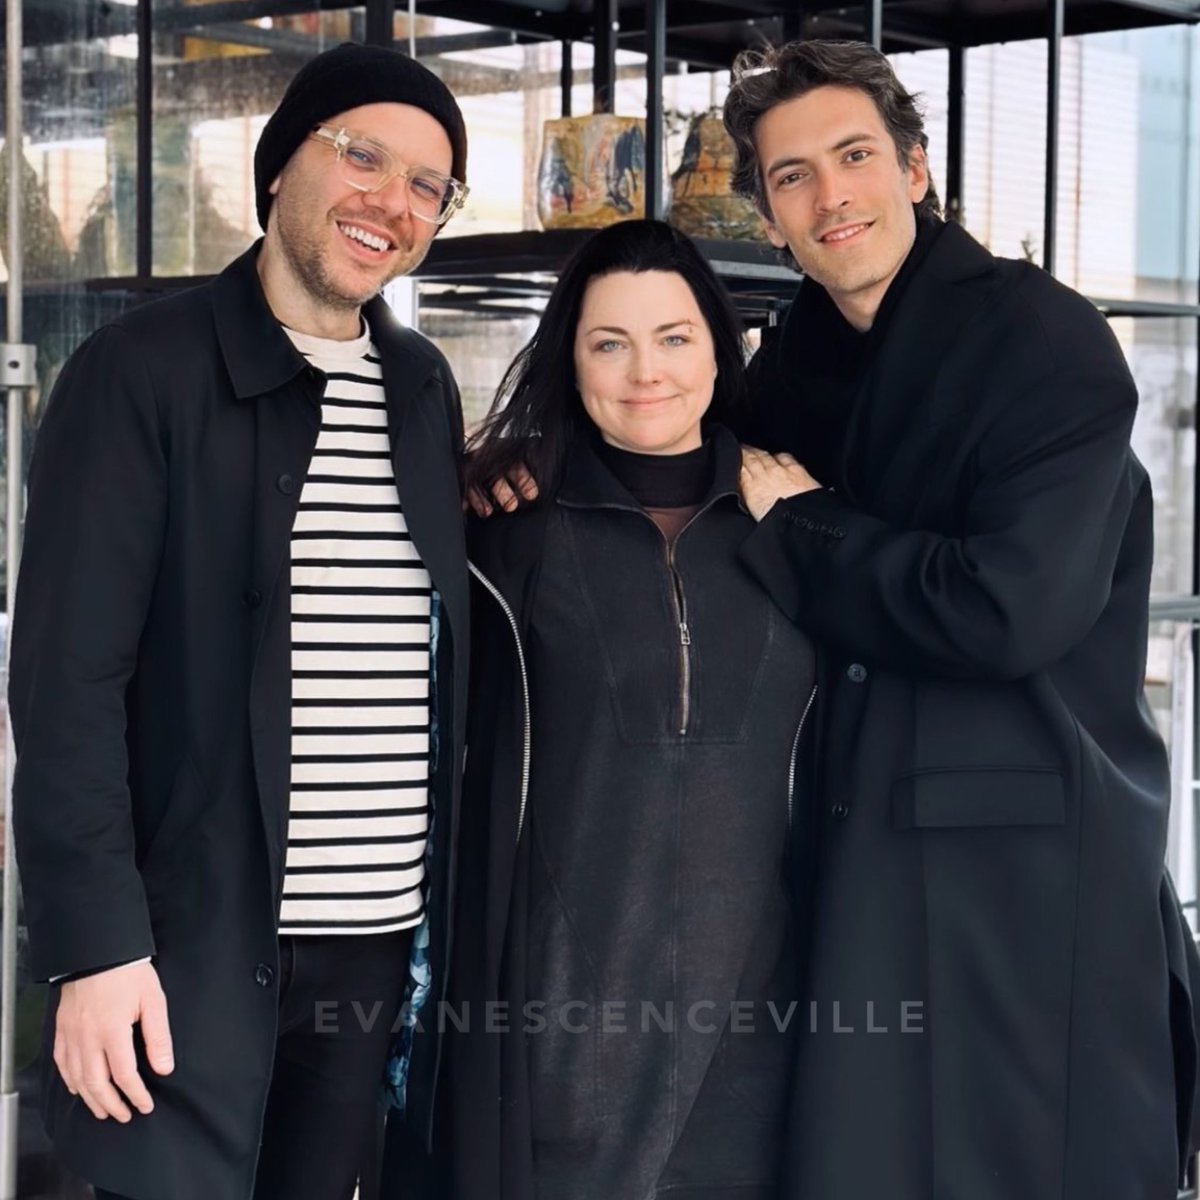 NEW PIC (2/2)! Amy Lee catching up with @AGreatBigWorld ’s @ianaxel and @giov_caccamo! ✨maybe we will get to listen to their collab soon? 😍 #amylee #evanescence #agreatbigworld